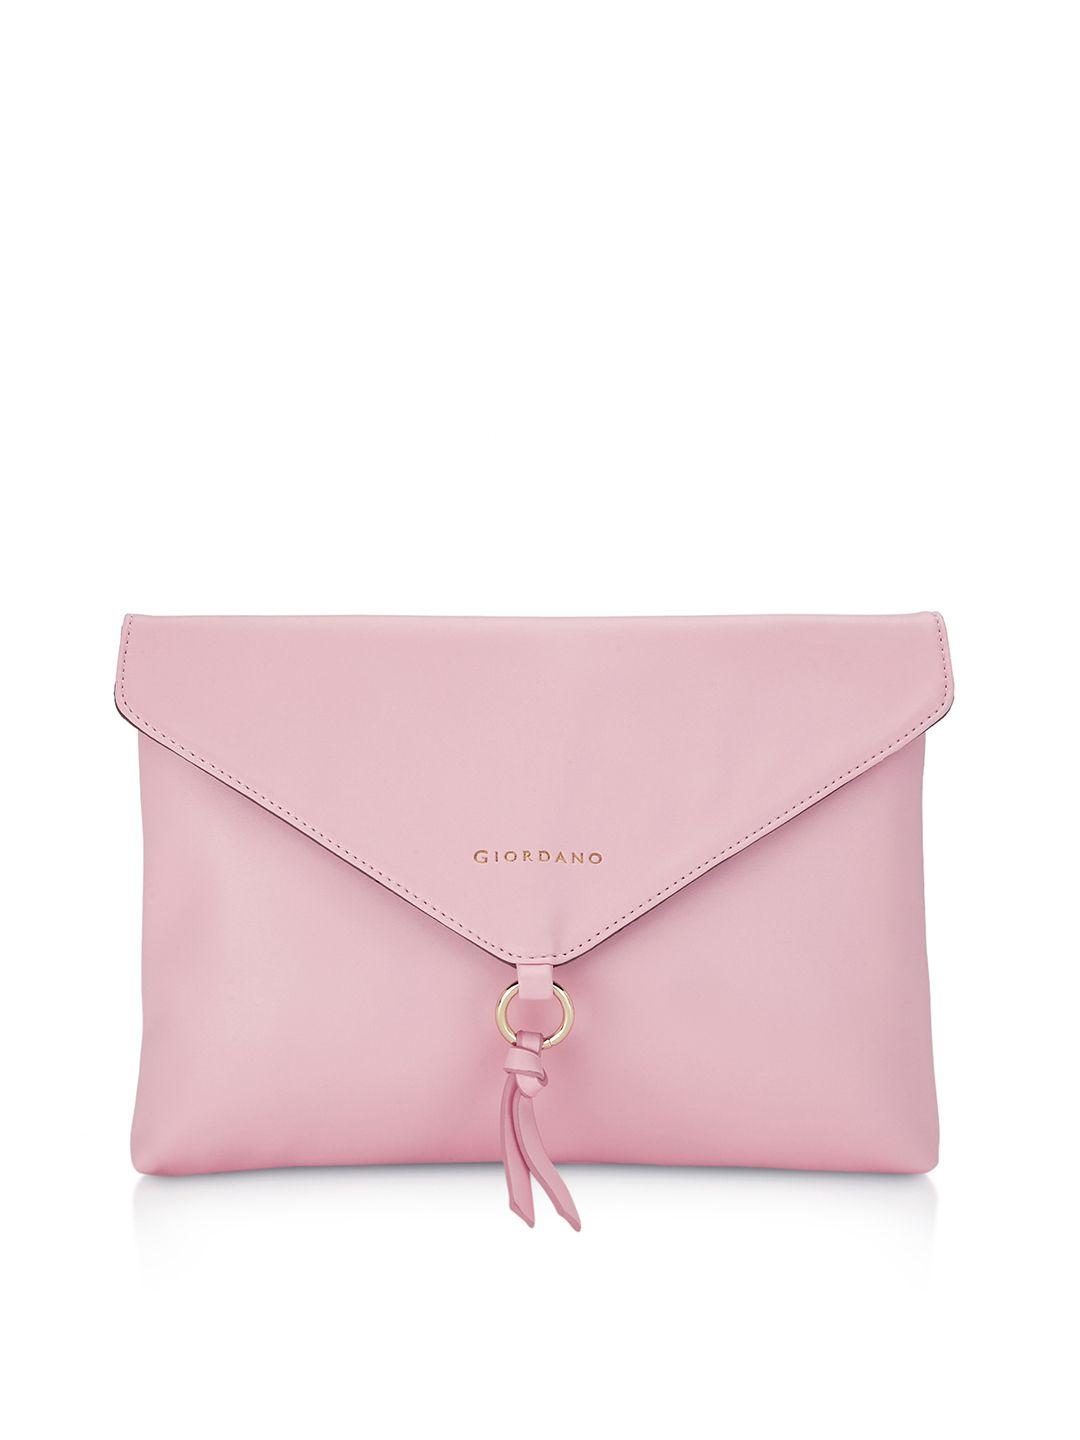 giordano pink solid envelope clutch